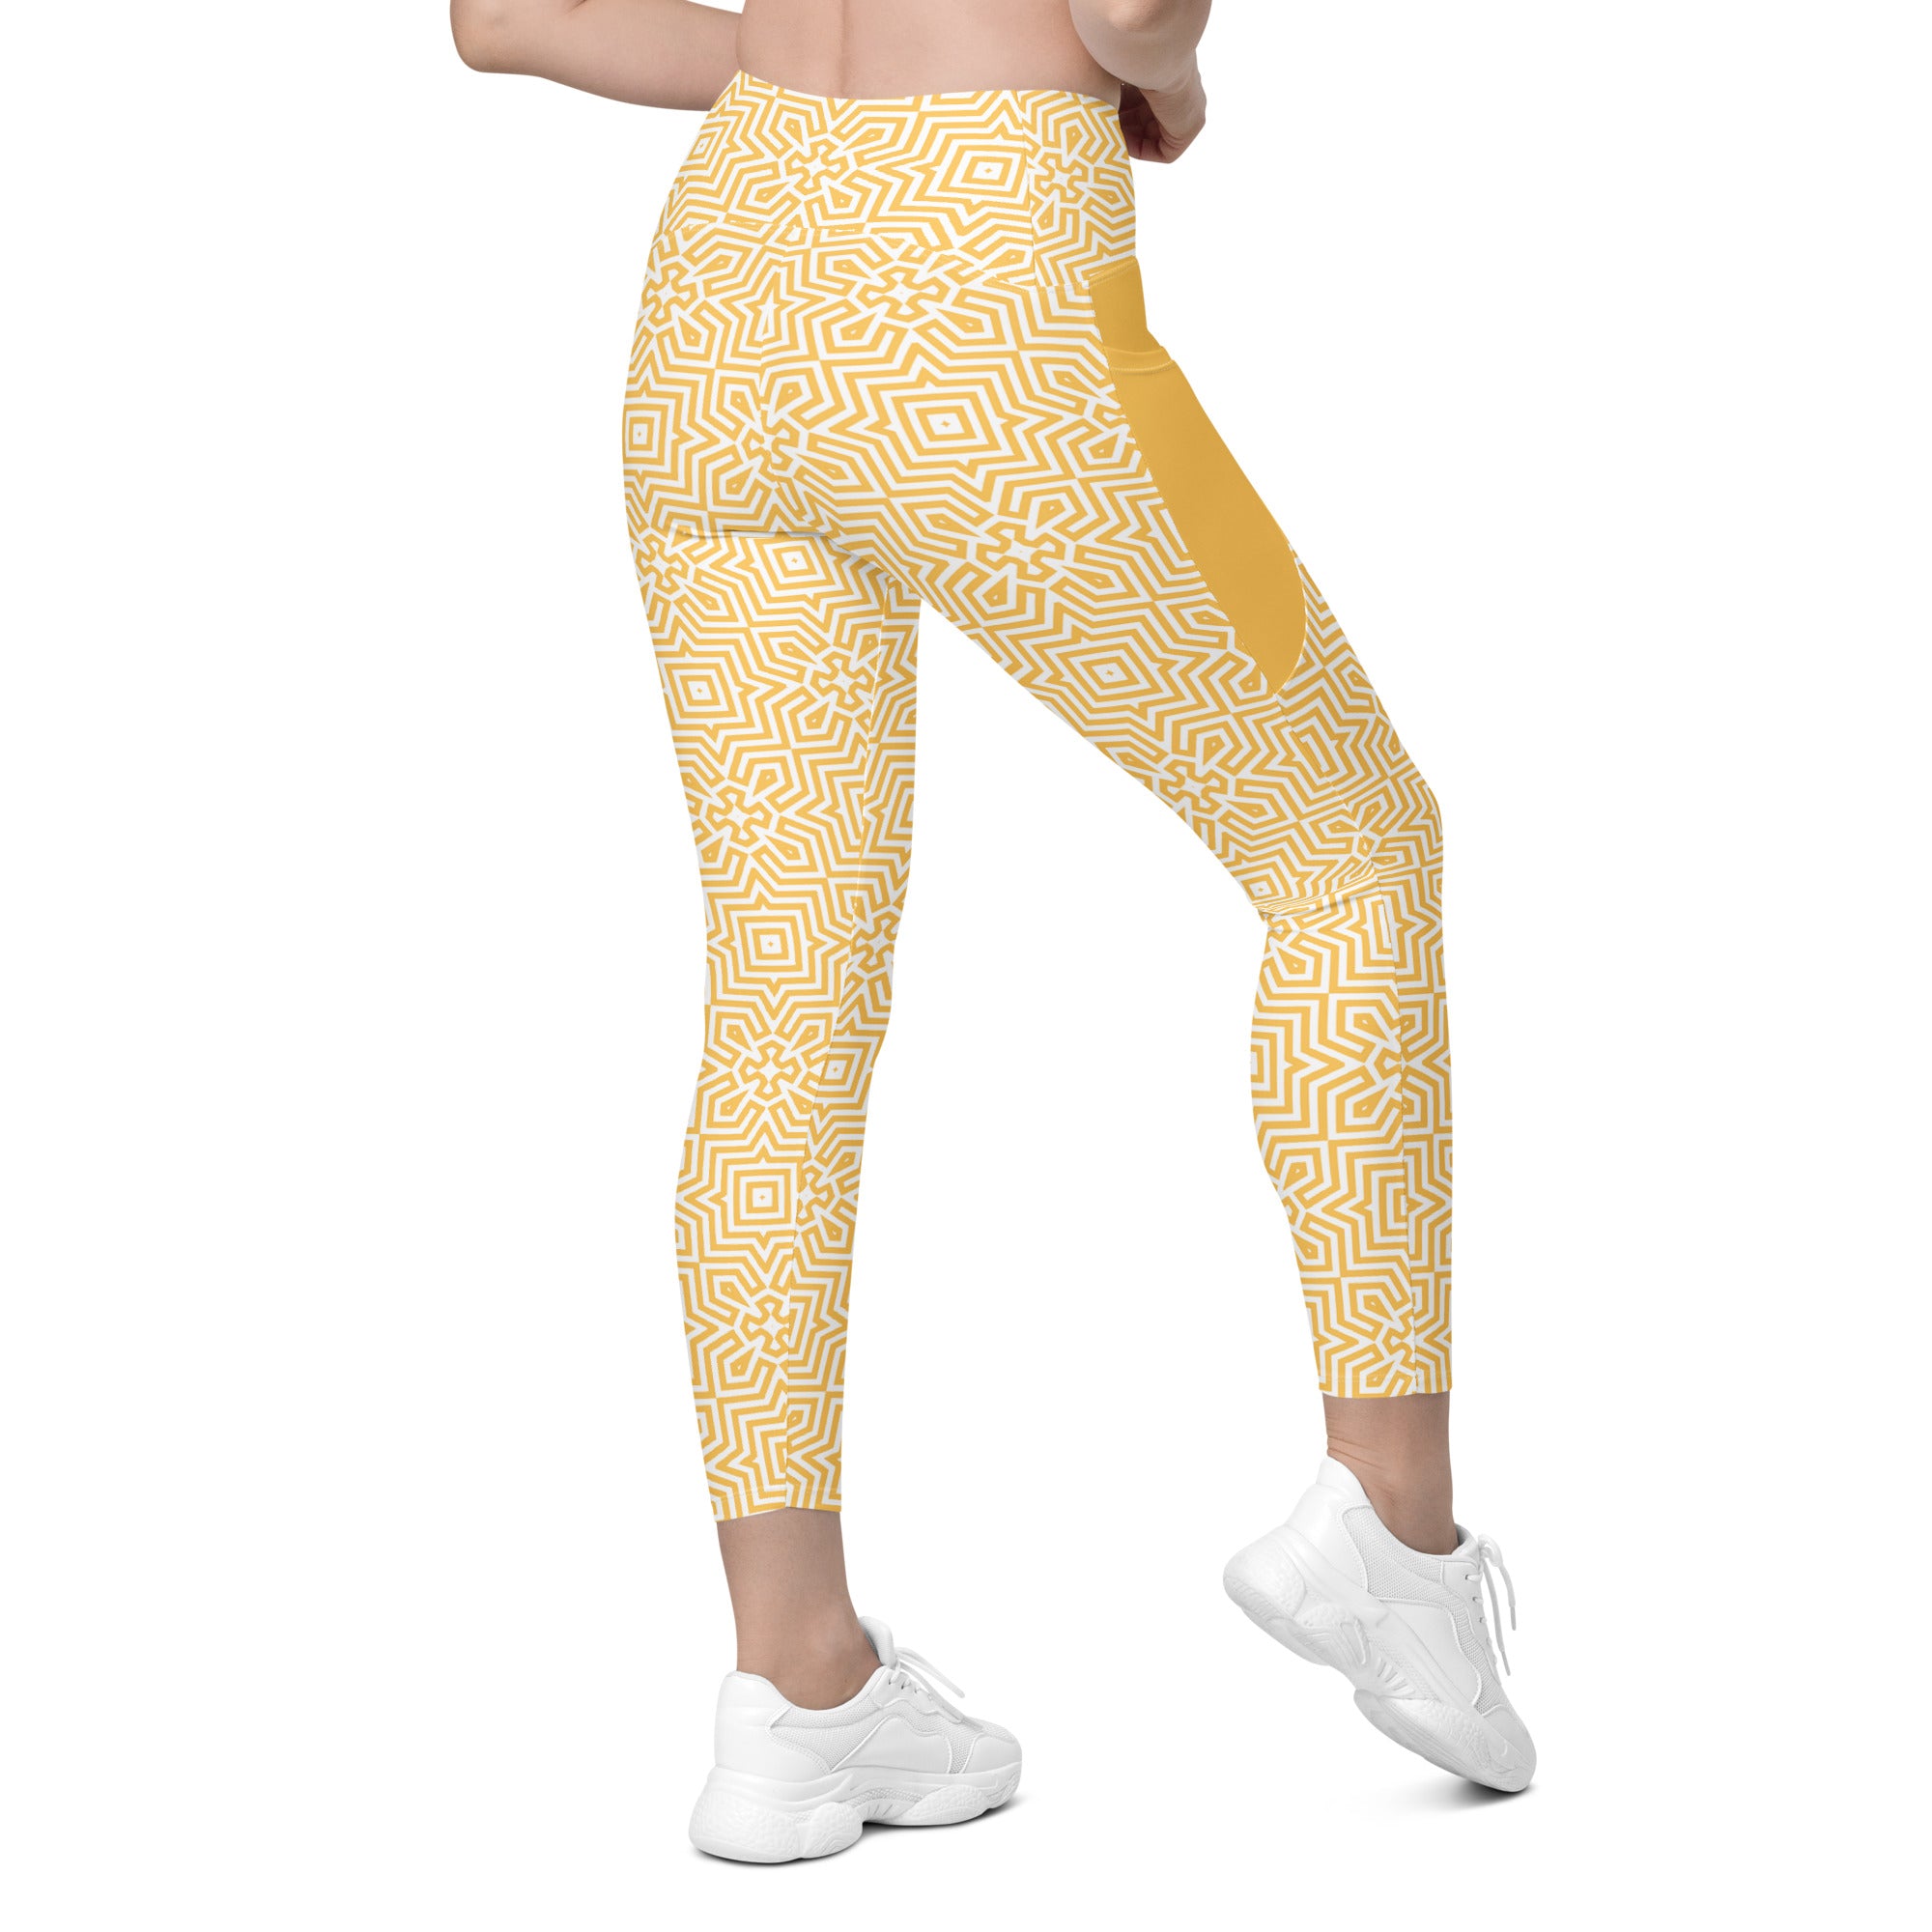 Versatile Moroccan Magic Crossover Leggings, ideal for both workout and casual outfits.